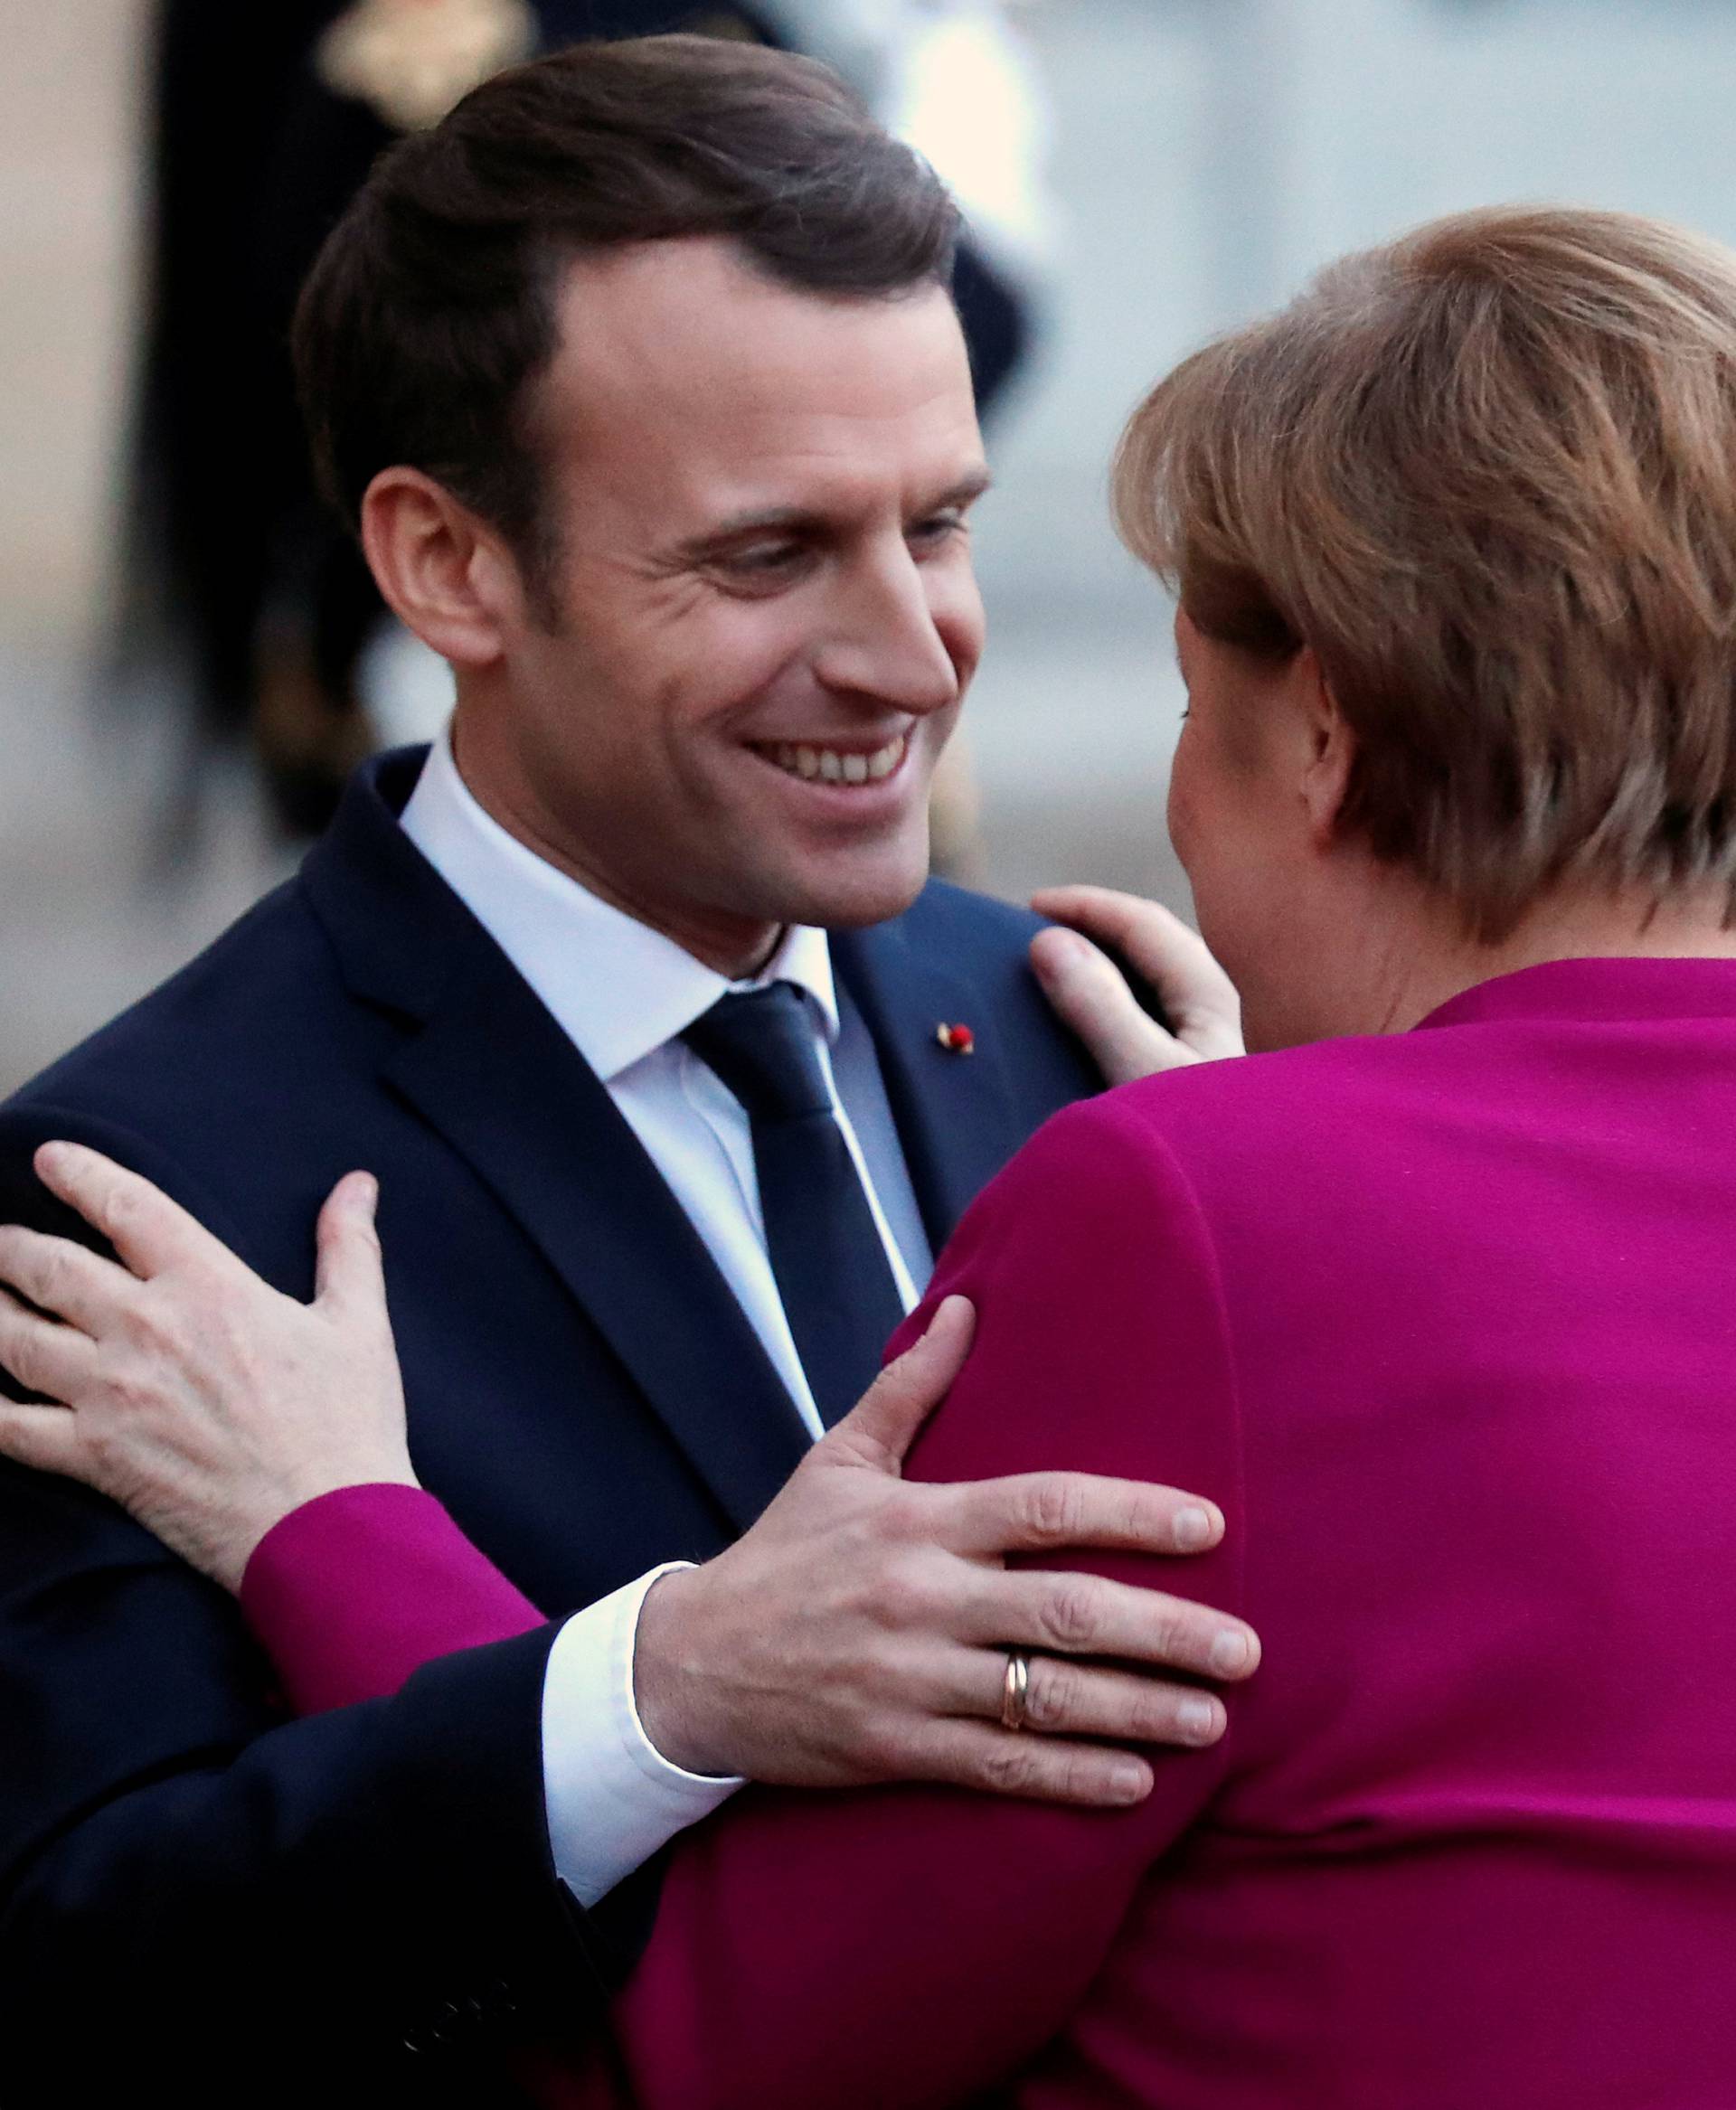 French President Emmanuel Macron greets German Chancellor Angela Merkel upon her arrival at the Elysee Palace in Paris